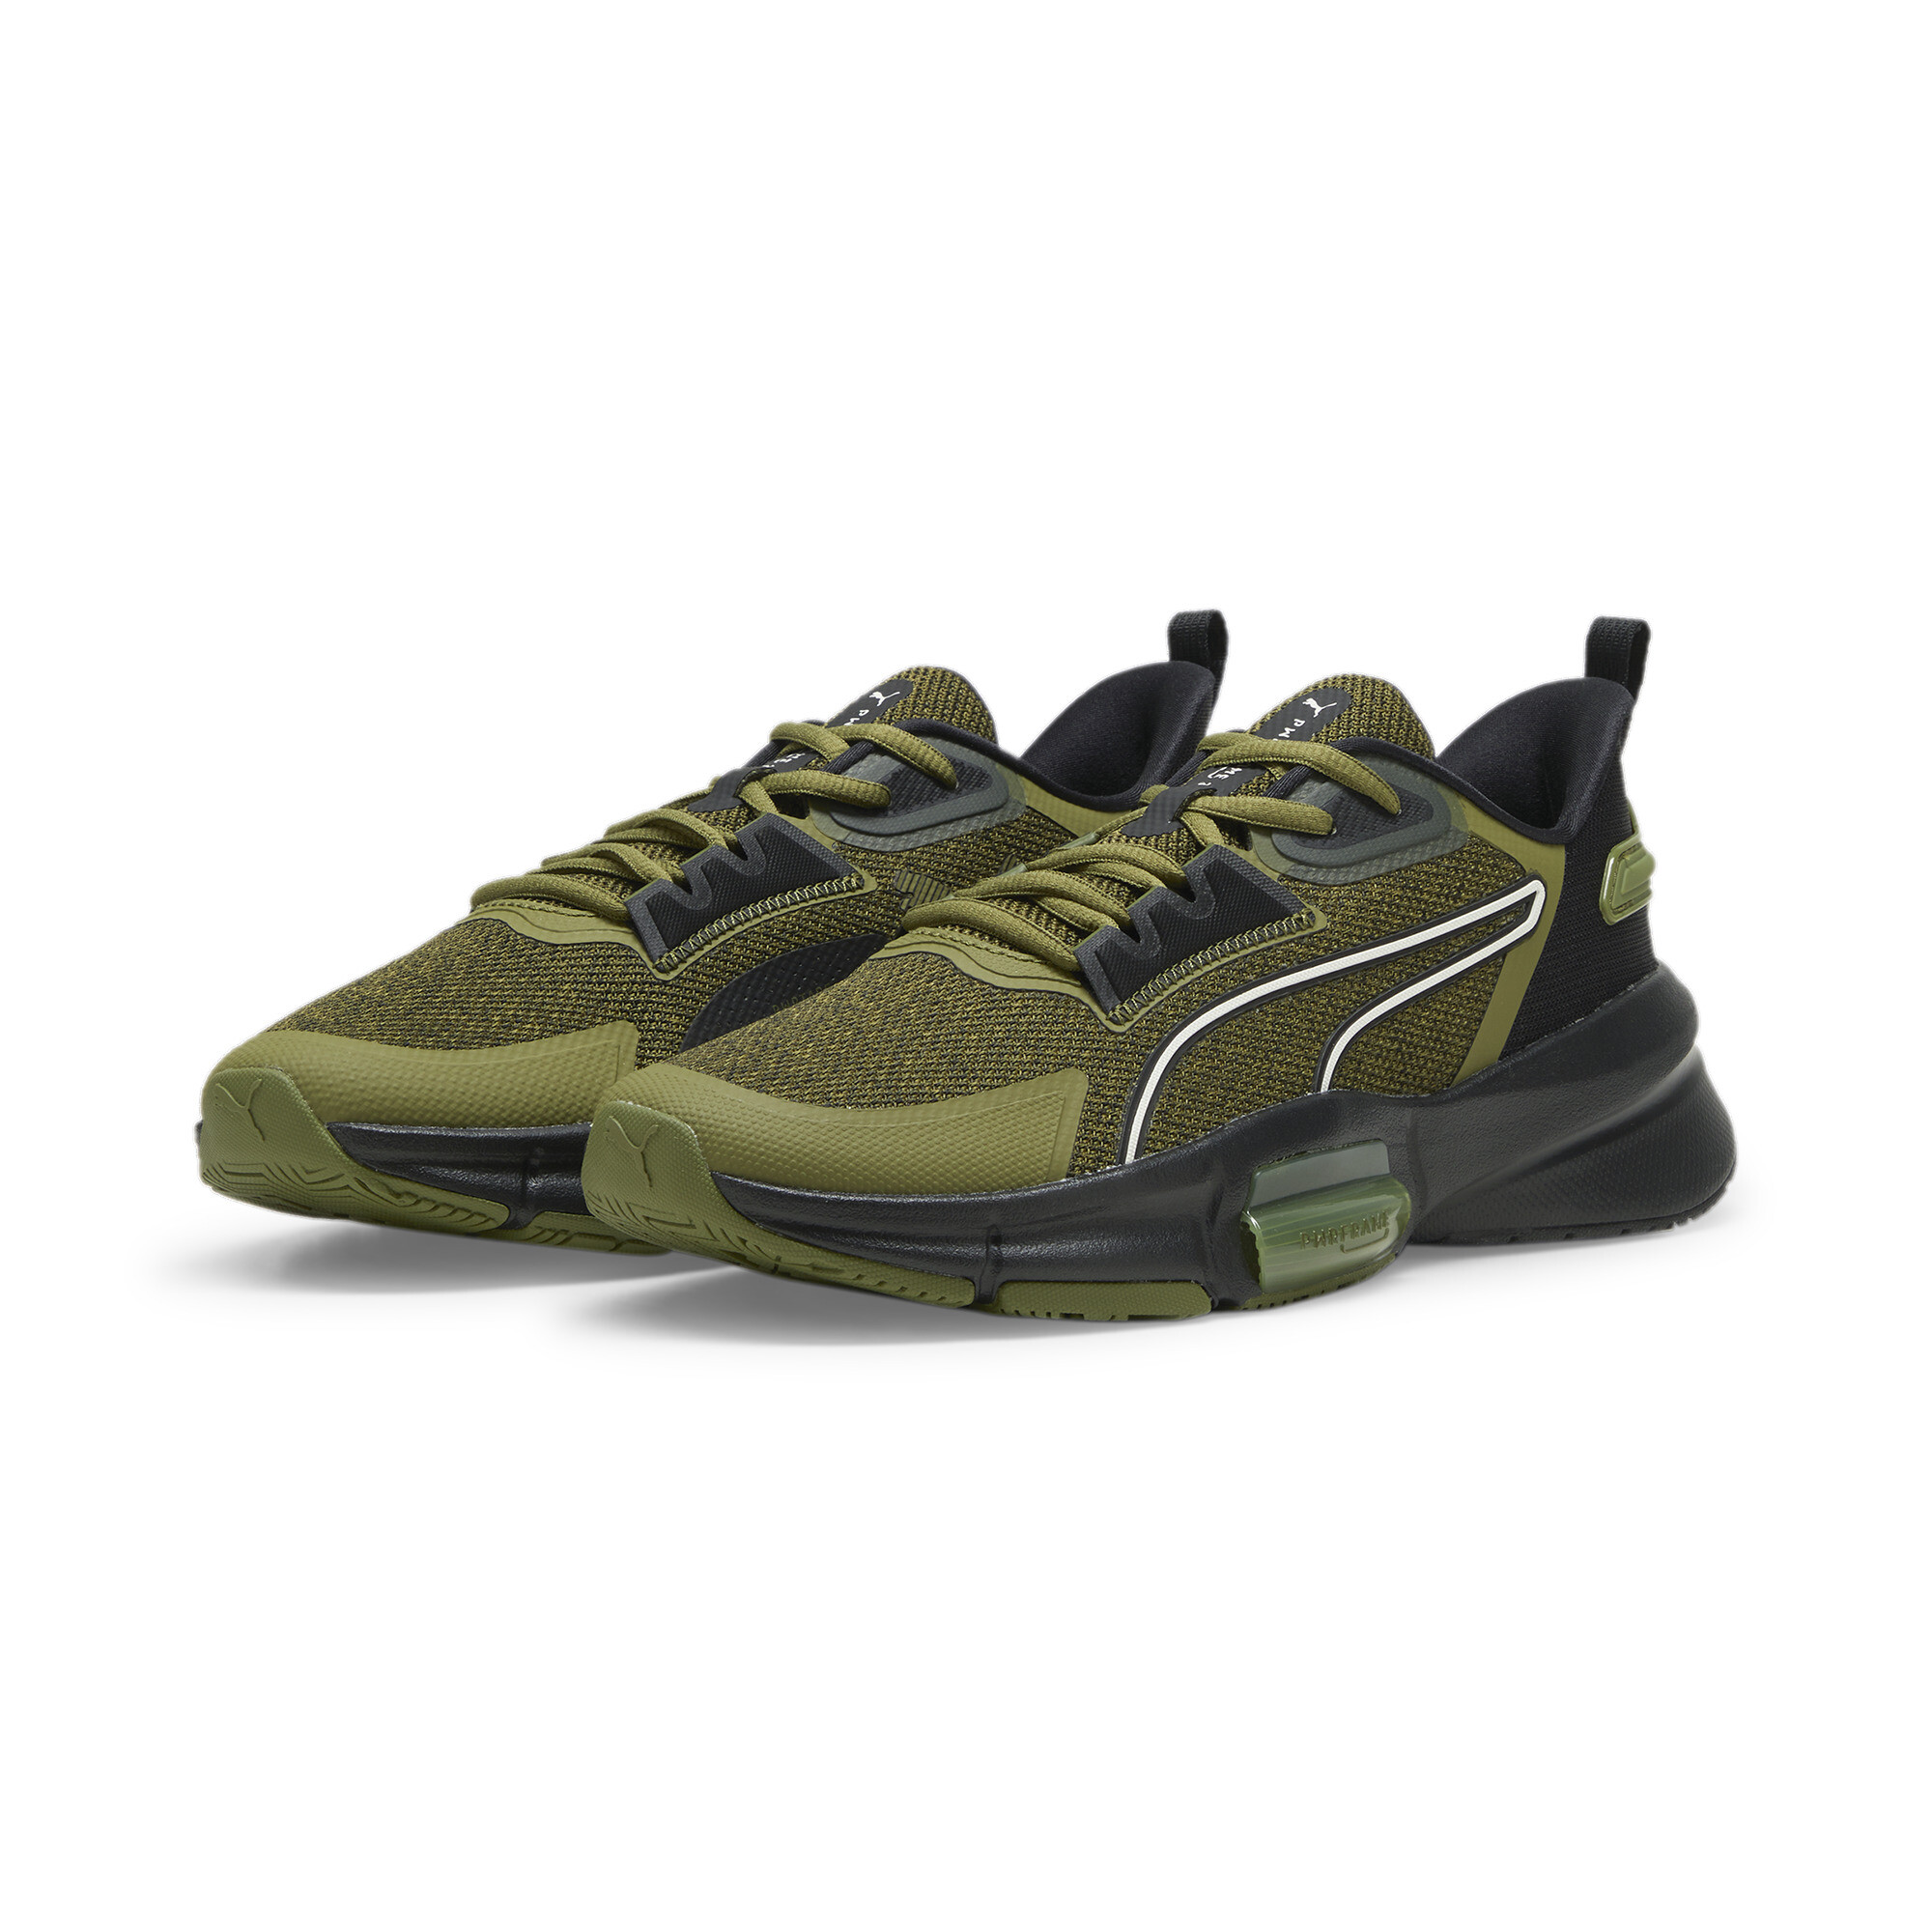 Men's PUMA PWRFrame TR 3 Neo Force Training Shoes In 40 - Green, Size EU 41